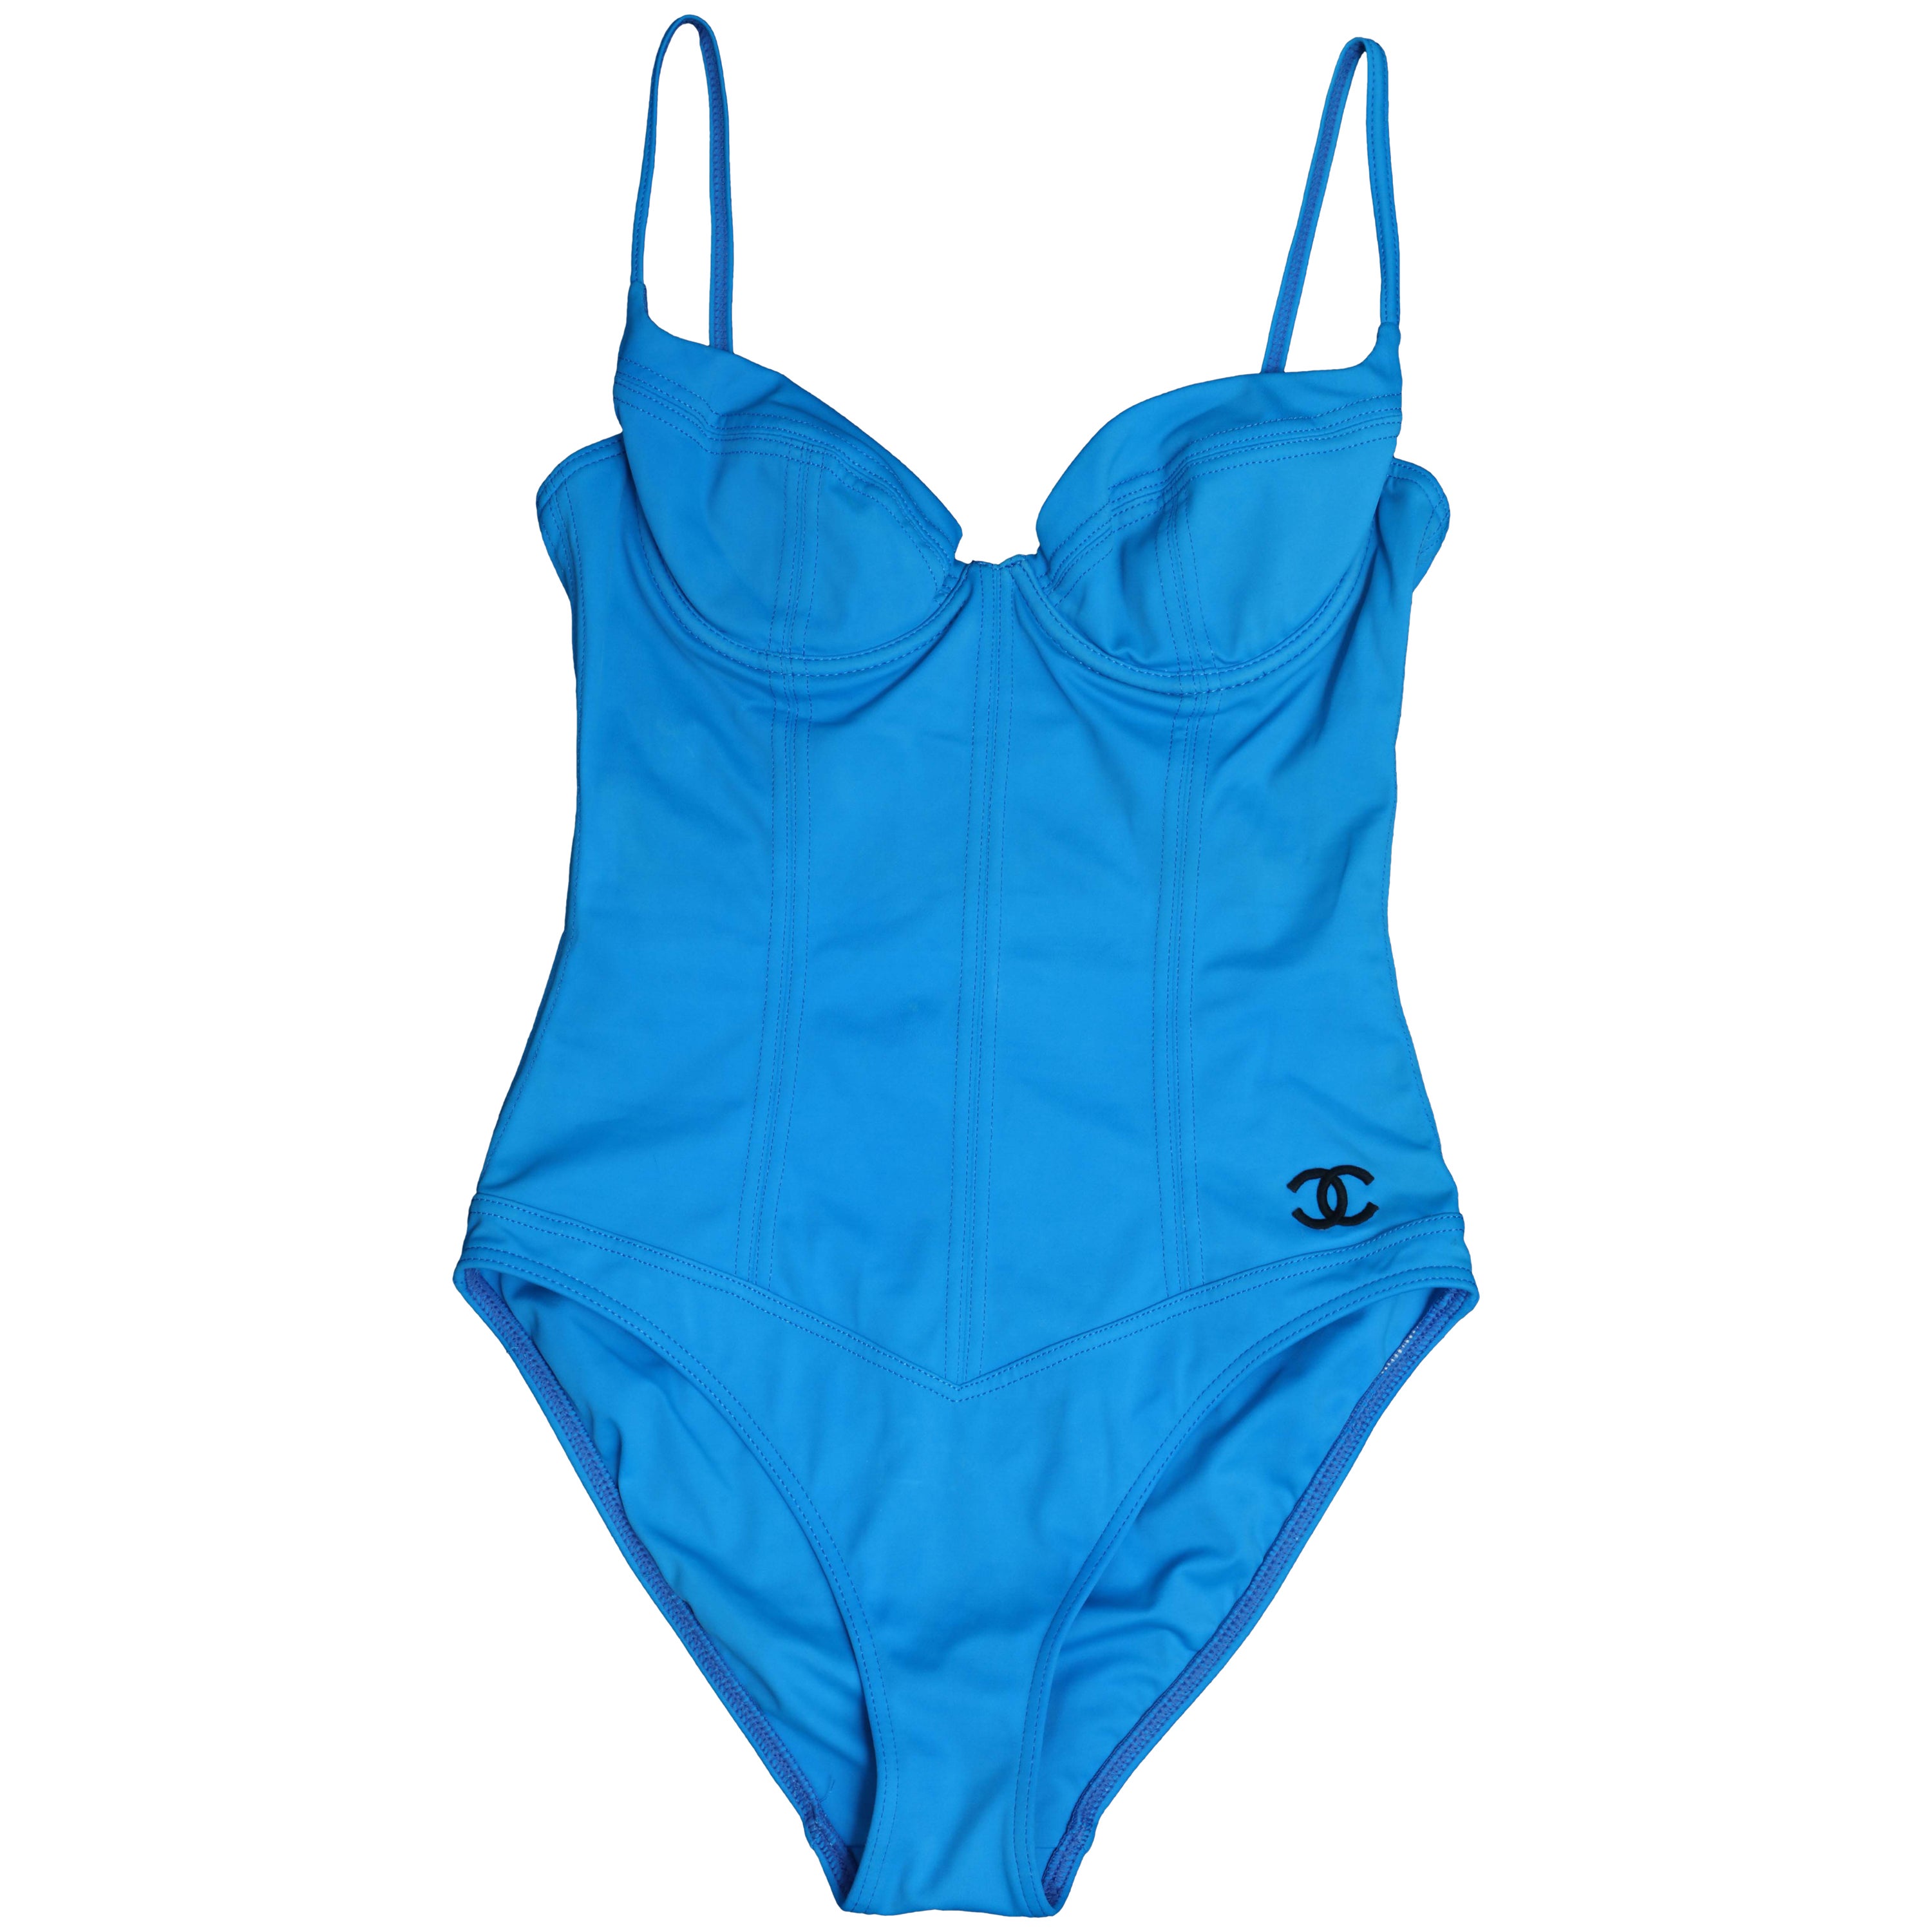 Vintage Chanel 1995 Blue Swimsuits As Seen on Claudia Schiffer at 1stDibs | claudia  schiffer swimsuit, chanel blue bikini, claudia schiffer chanel 1995